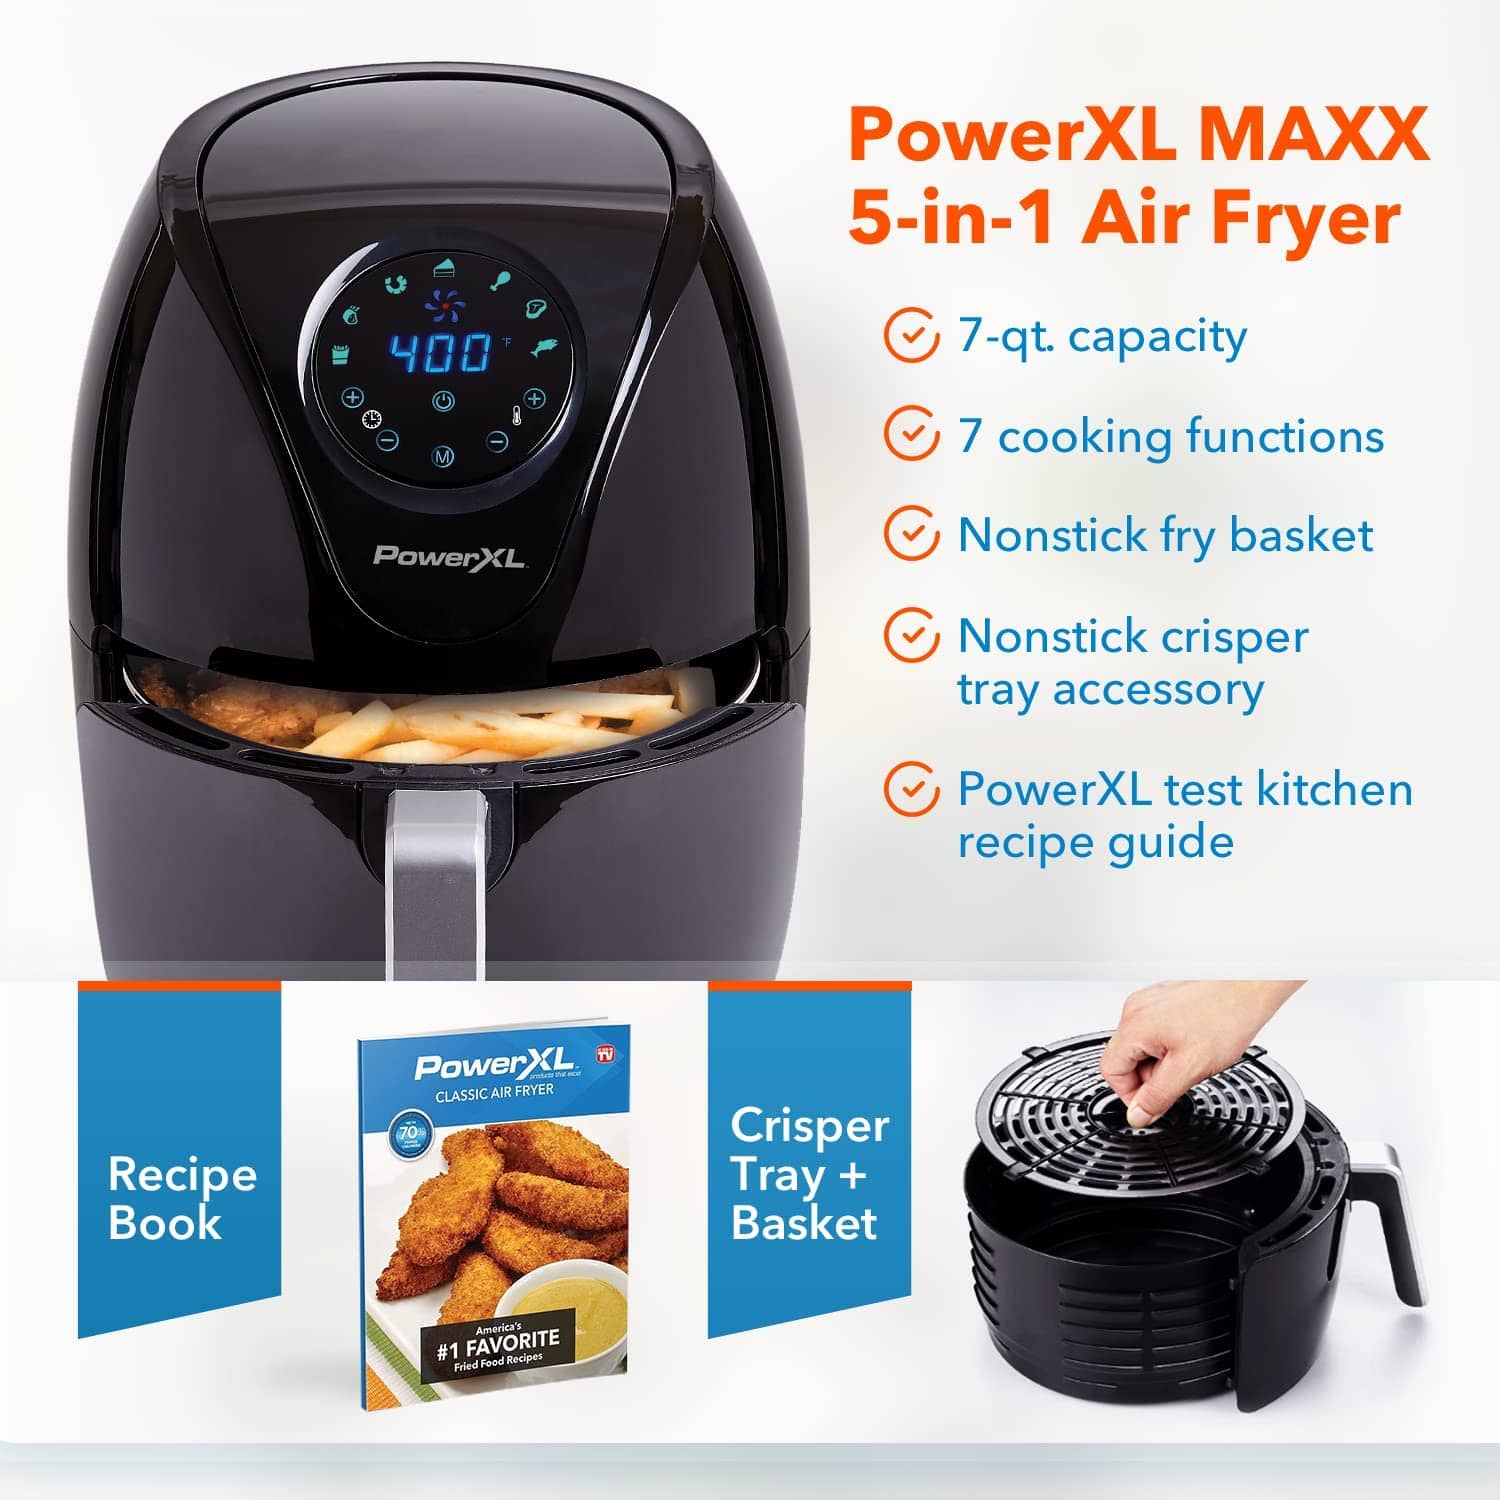 Bake 2 QT, Red Reheat Non Stick Coated Basket Cookbook PowerXL Air Fryer Vortex Multi Cooker with Roast 